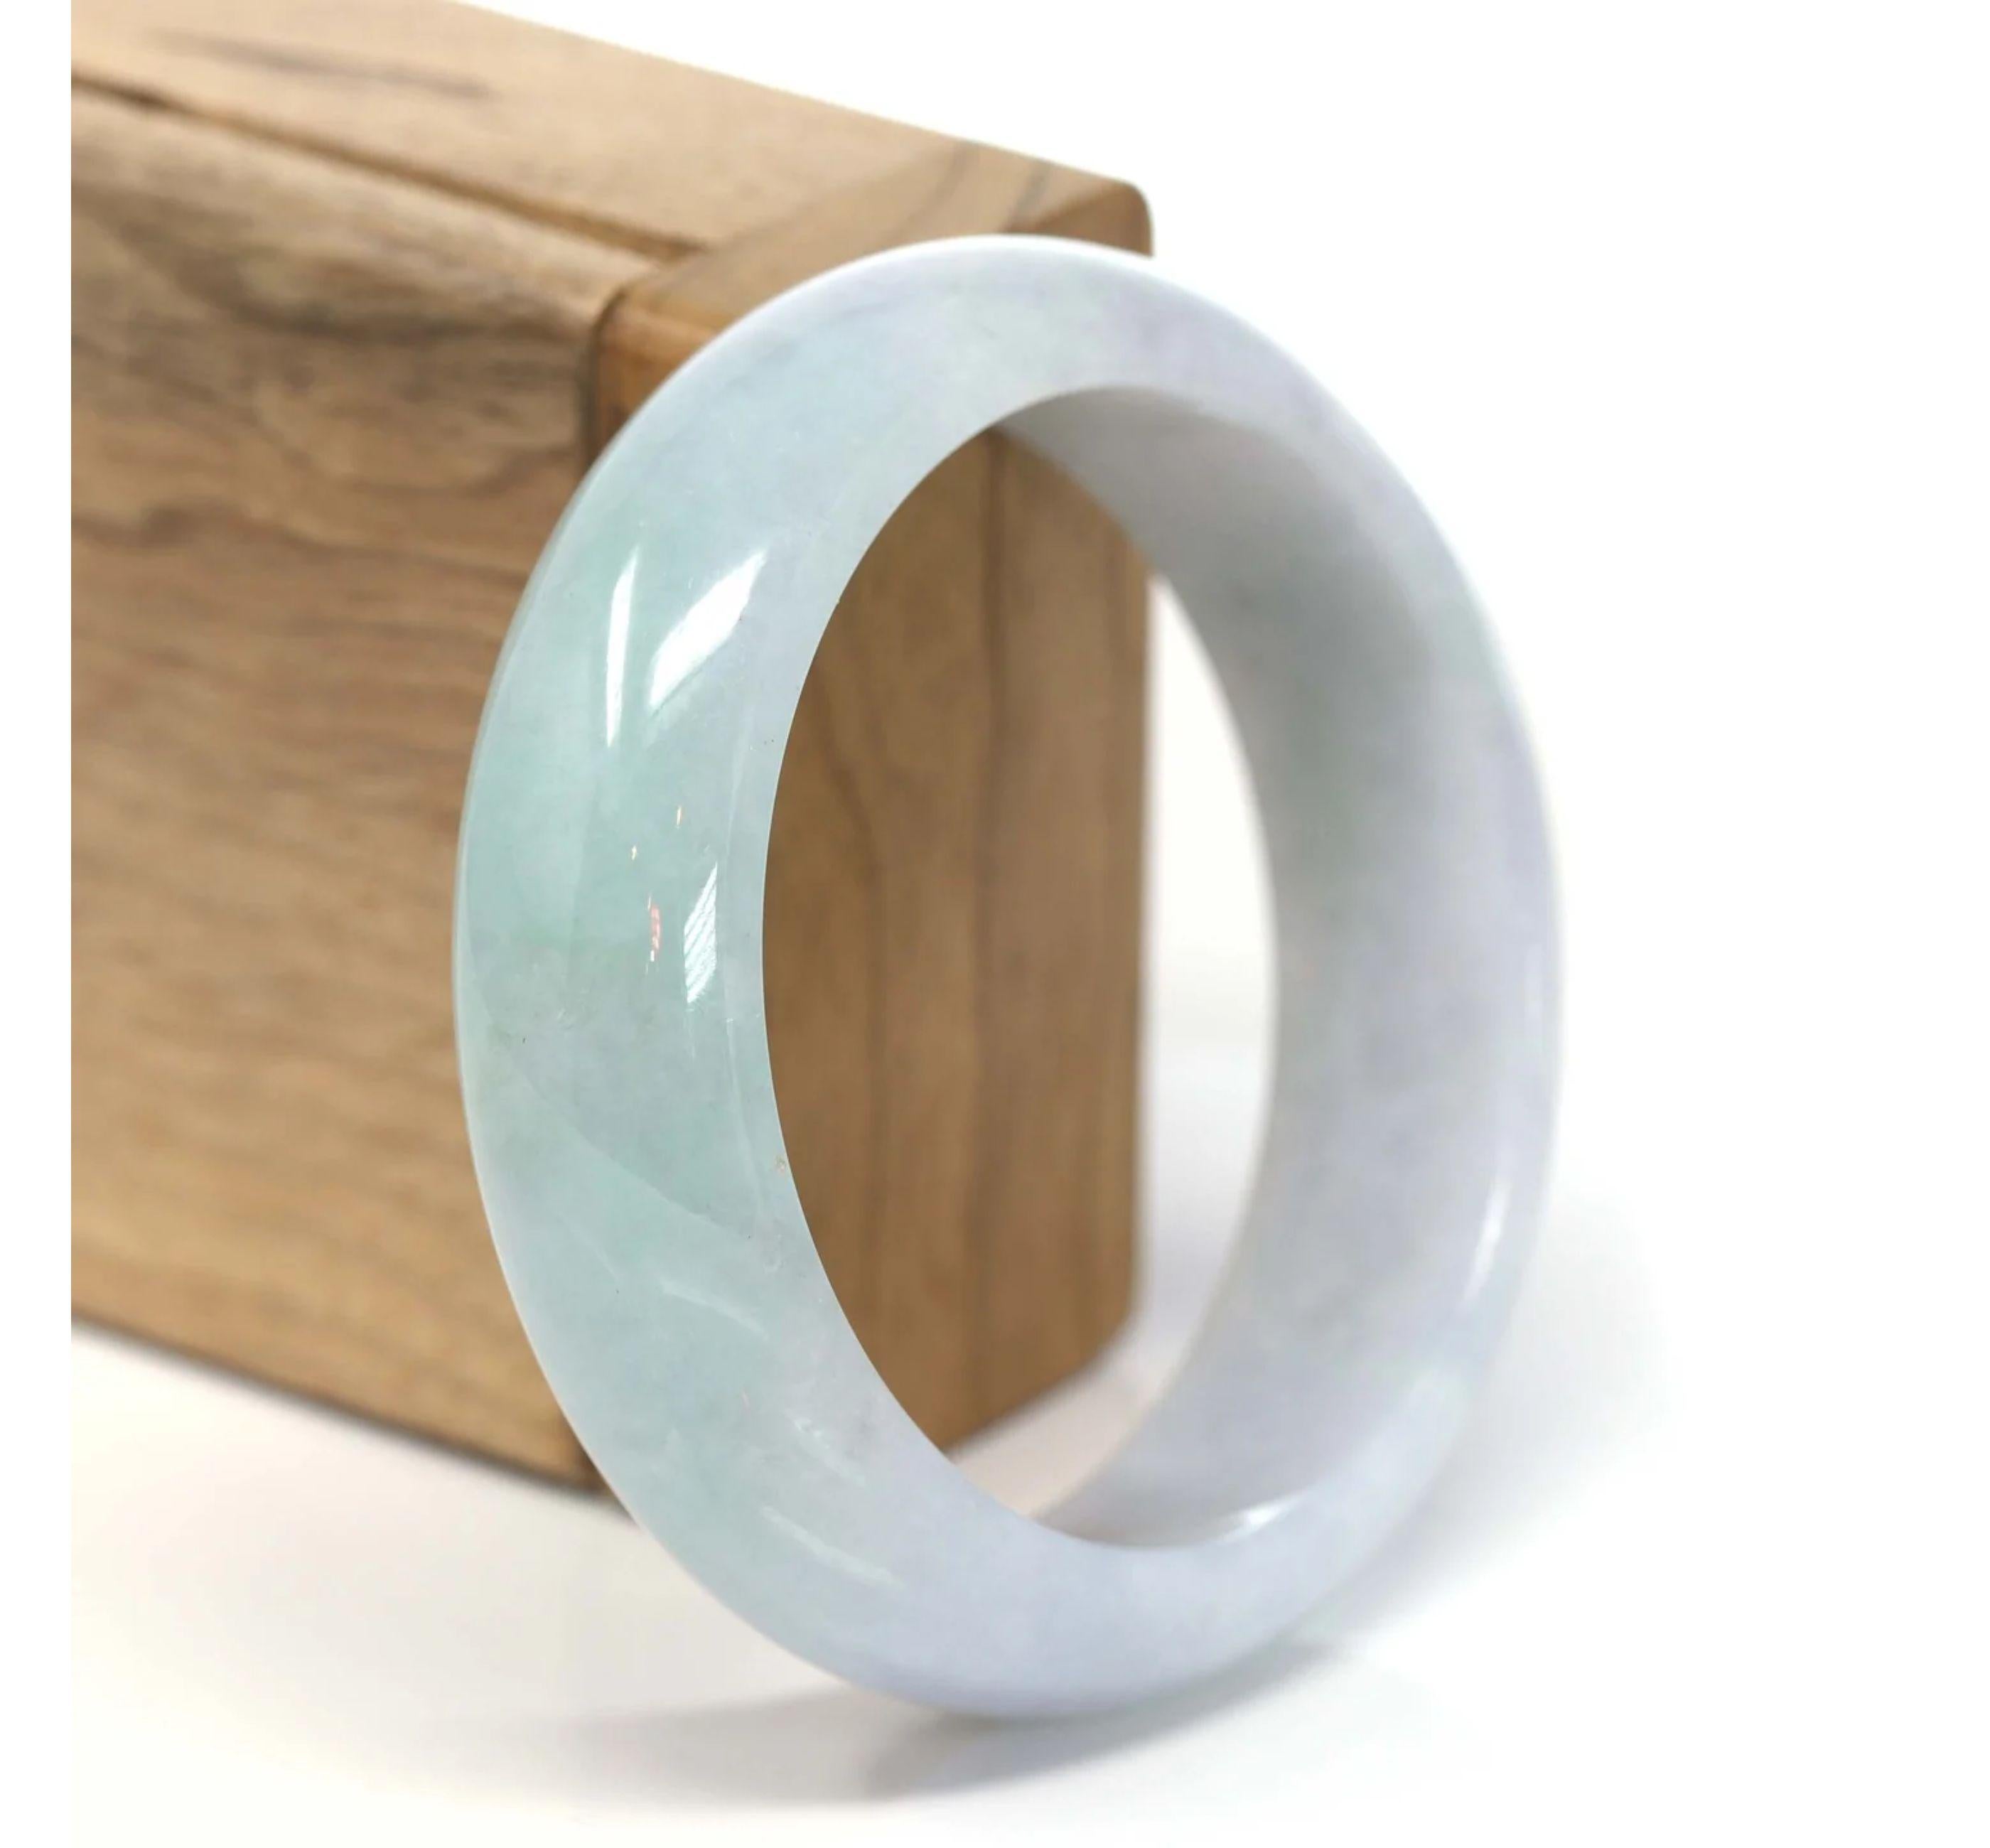  * DETAILS--- Natural Light Green Genuine Burmese Jadeite Jade Bangle Bracelet.  All RealJade Co.® Jewelry's Jade Bangles are guaranteed to be untreated. The jade texture is relatively fine with some patches of varieties of gorgeous light green